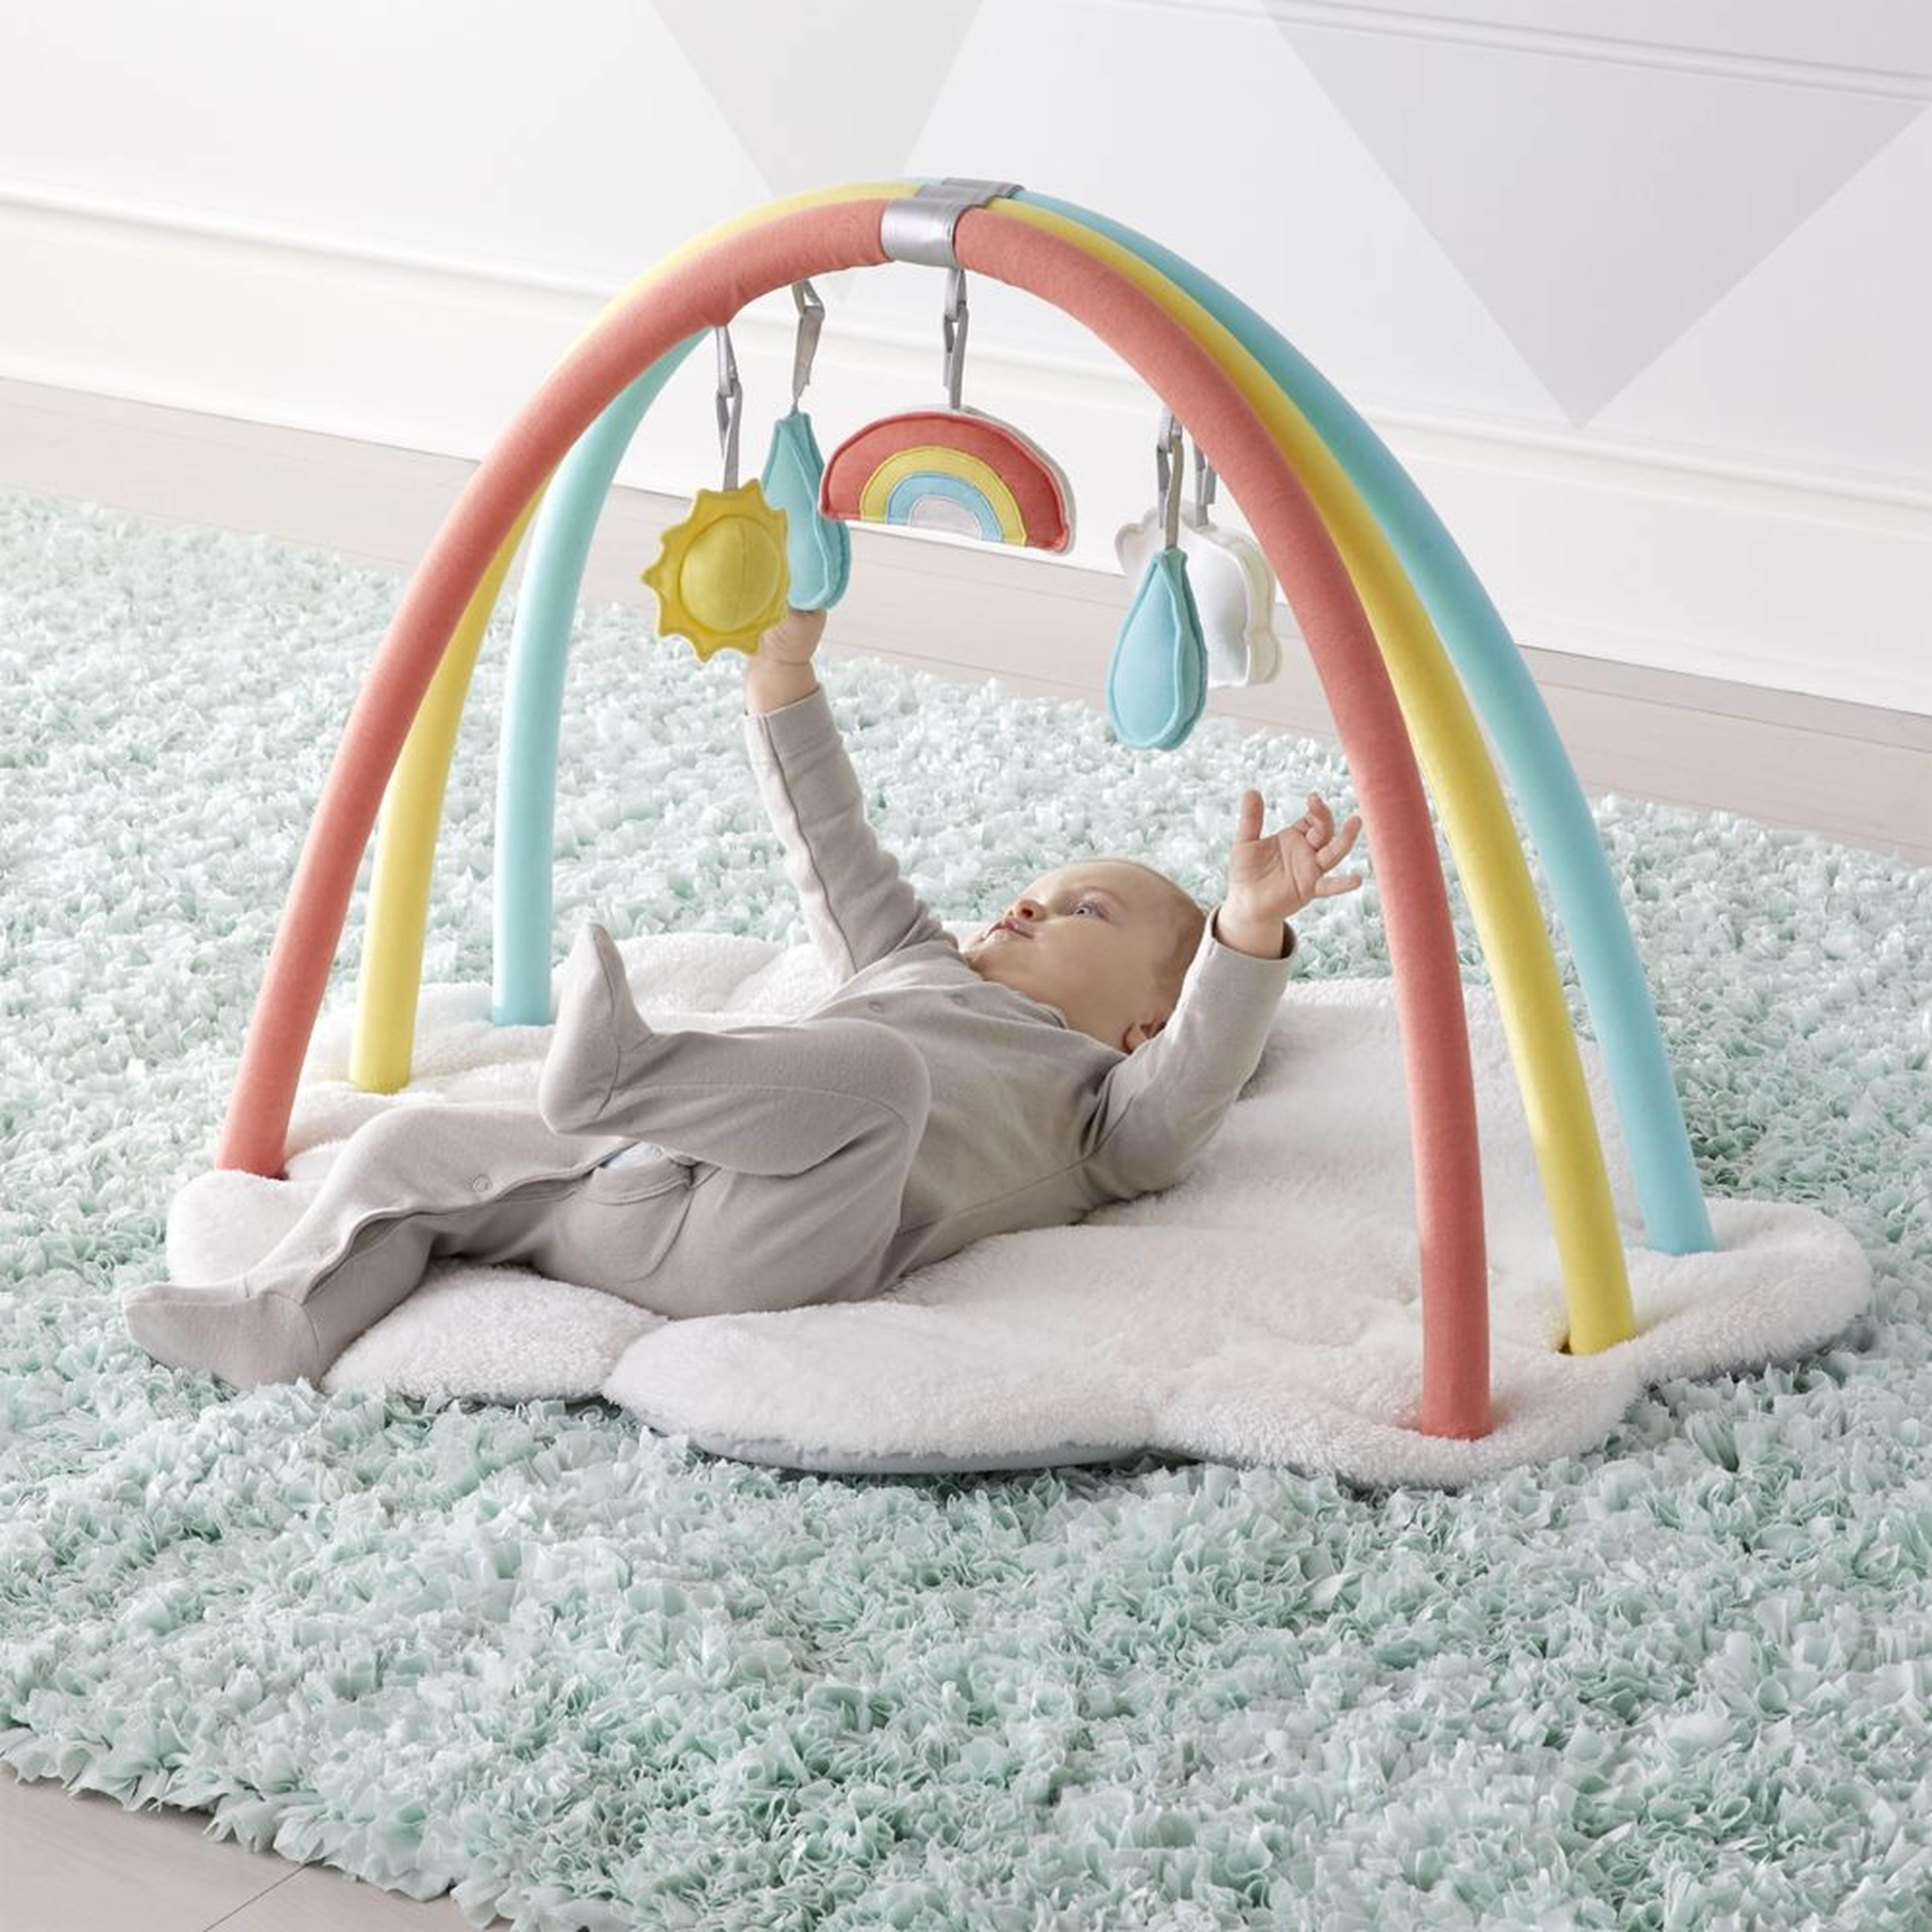 Rainbow Baby Activity Gym - Crate and Barrel